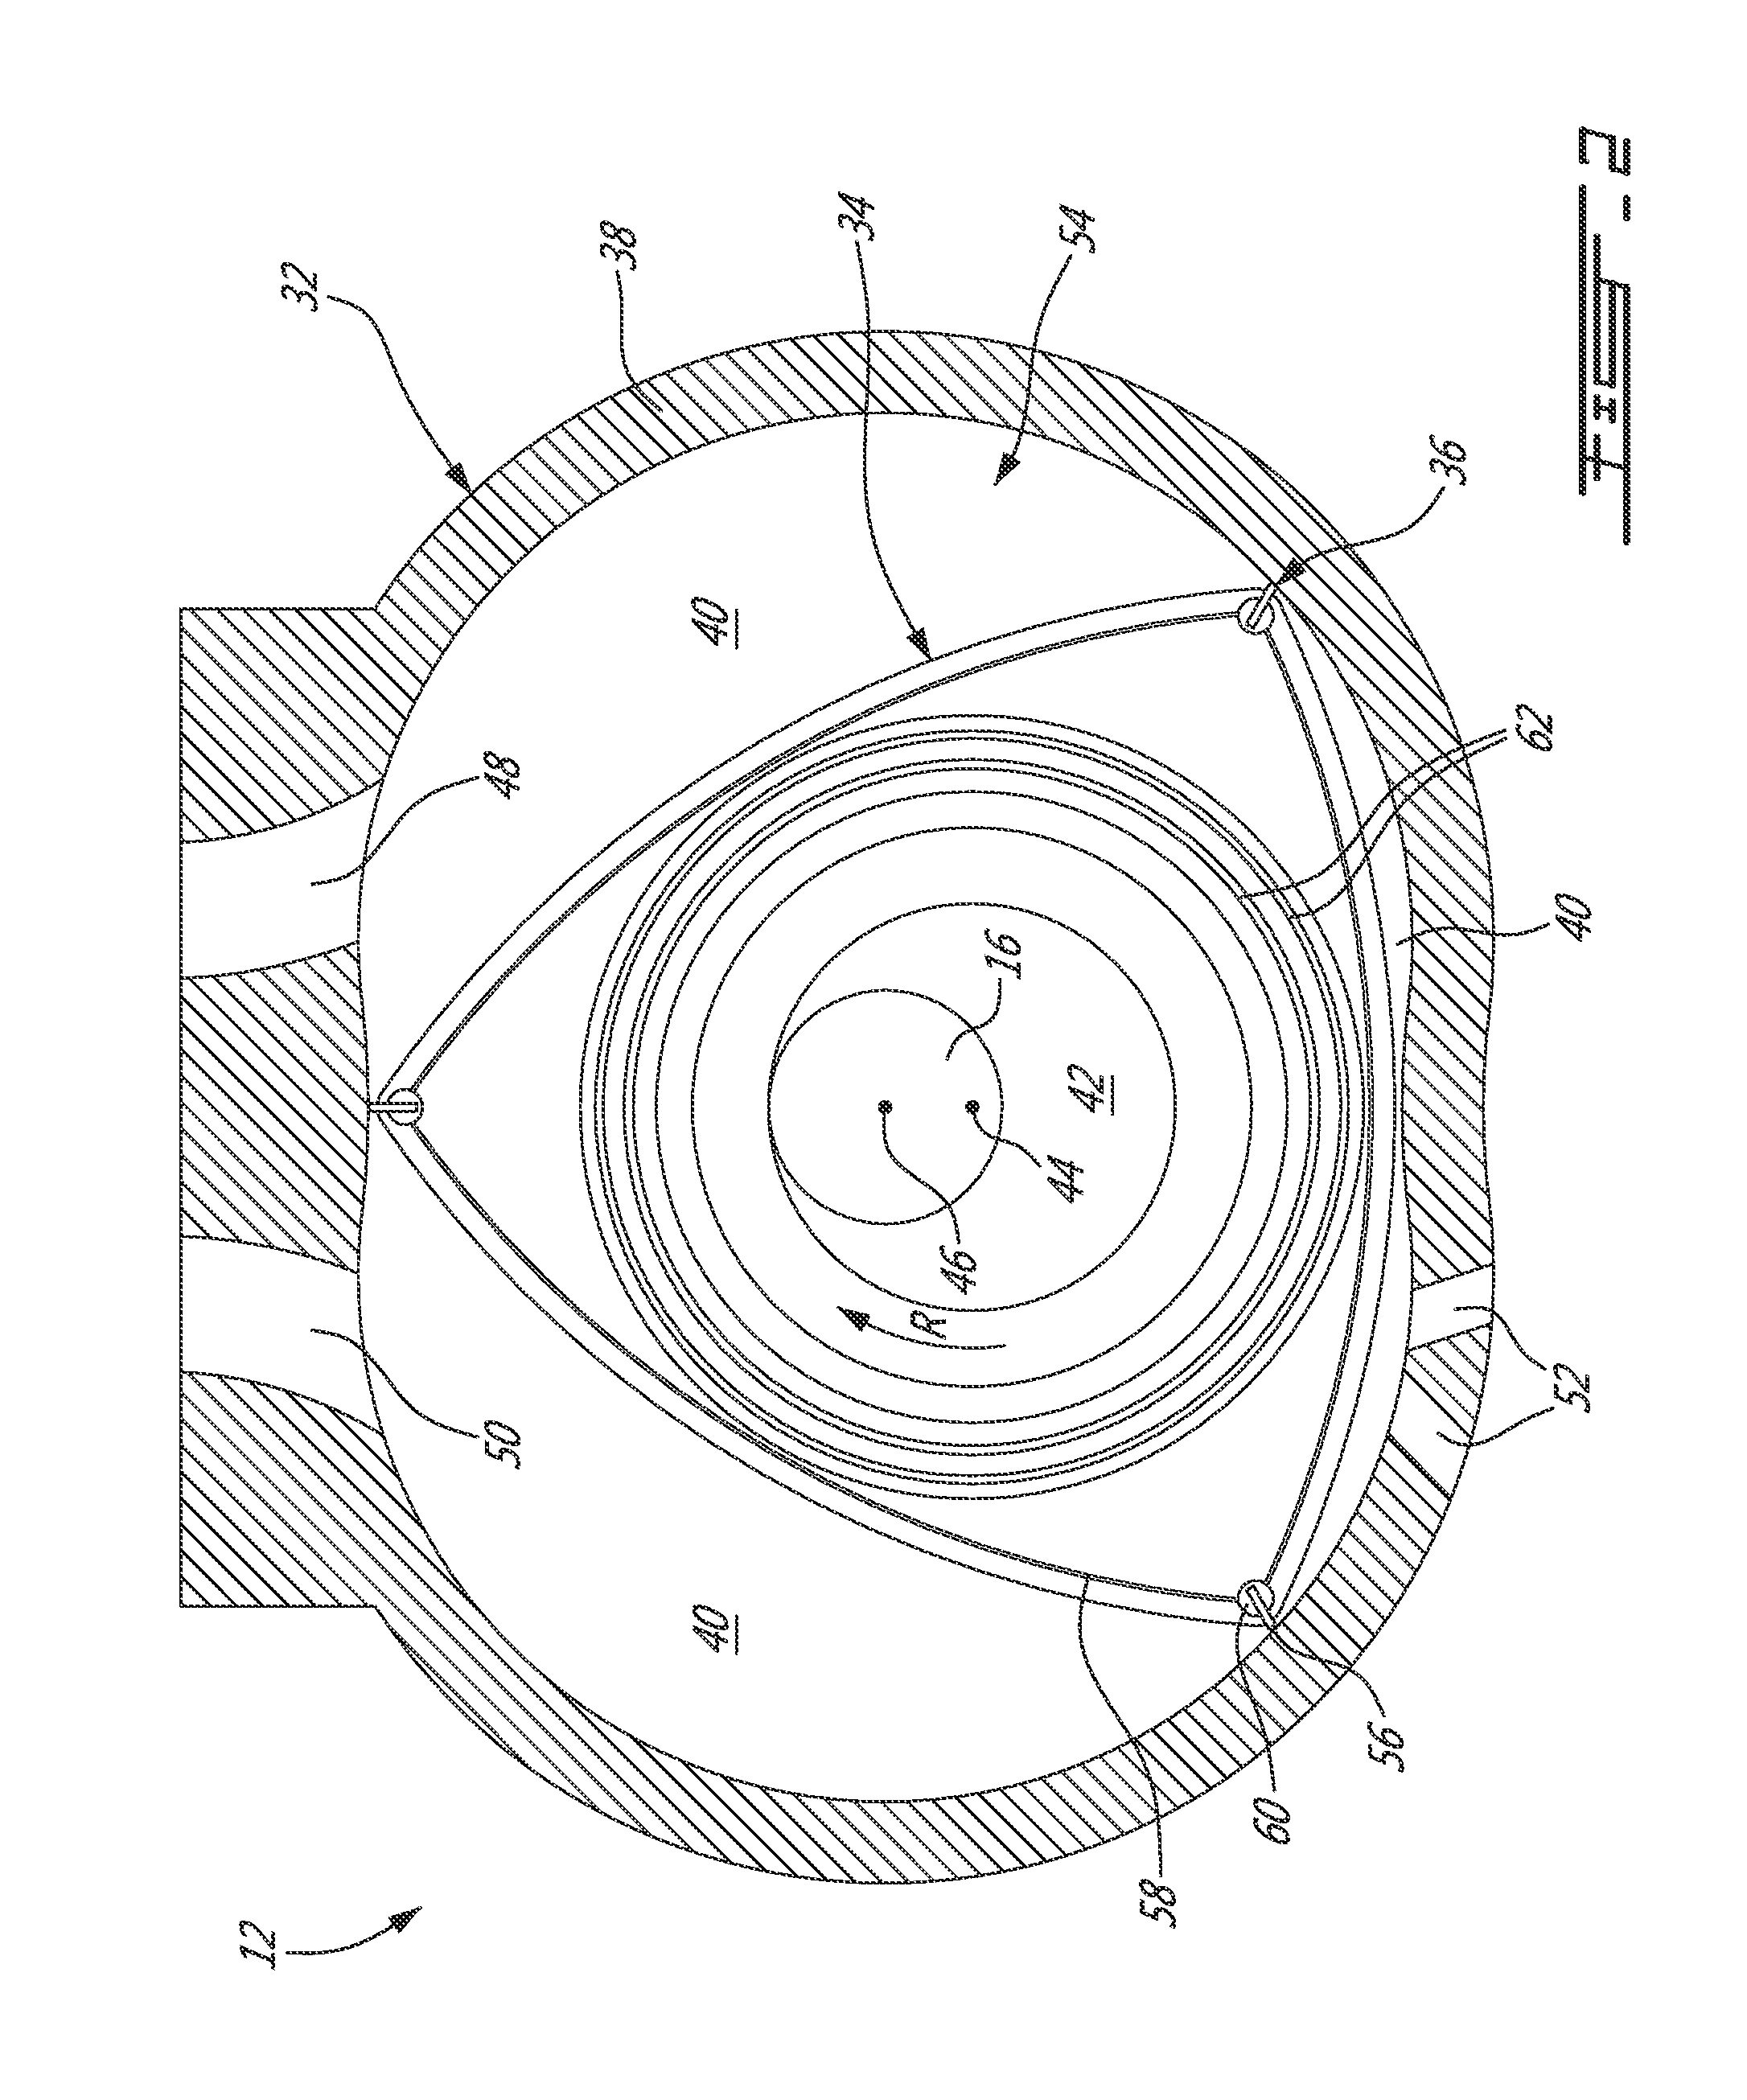 Compound cycle engine